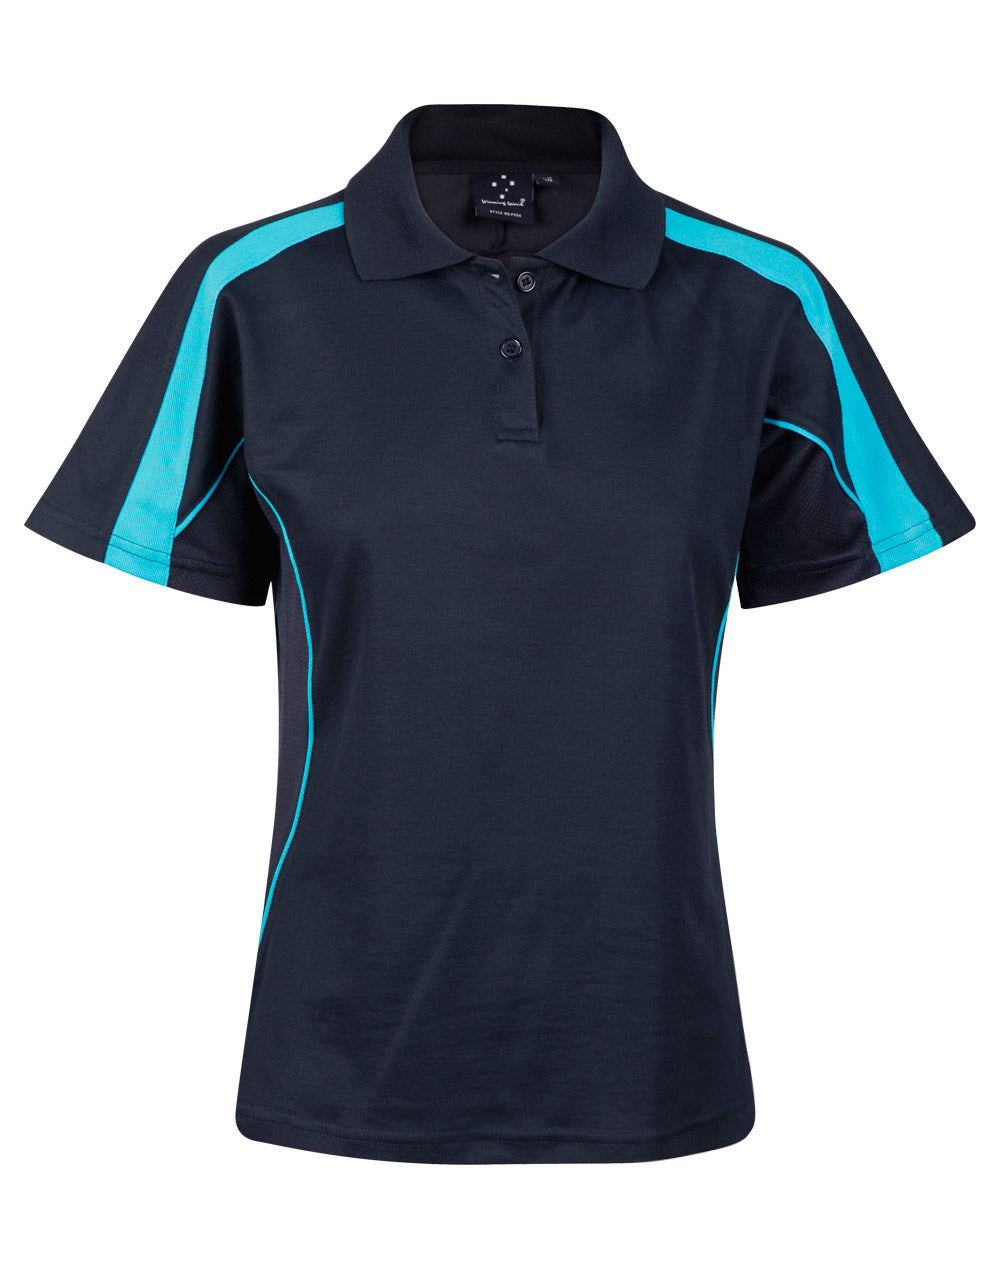 Ladies Ottoman Polo Shirt - made by AIW